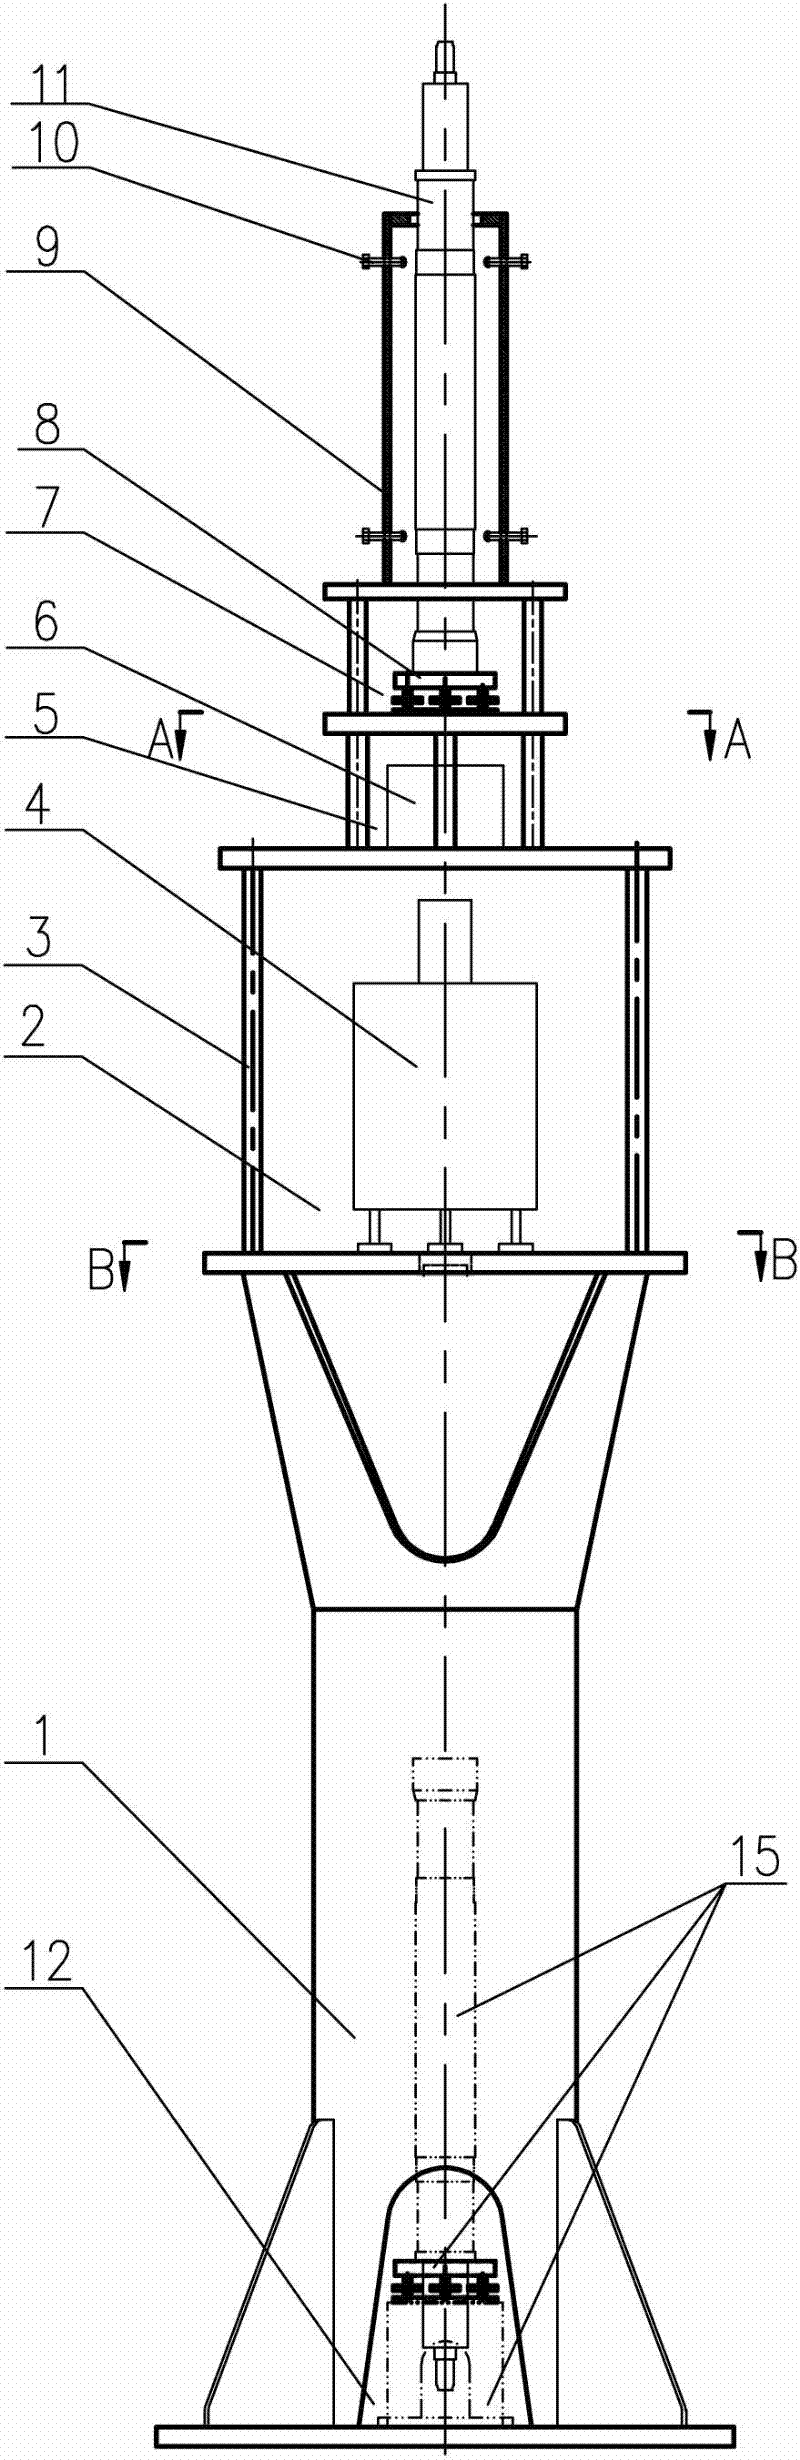 Device and method for calibrating plumb aligner